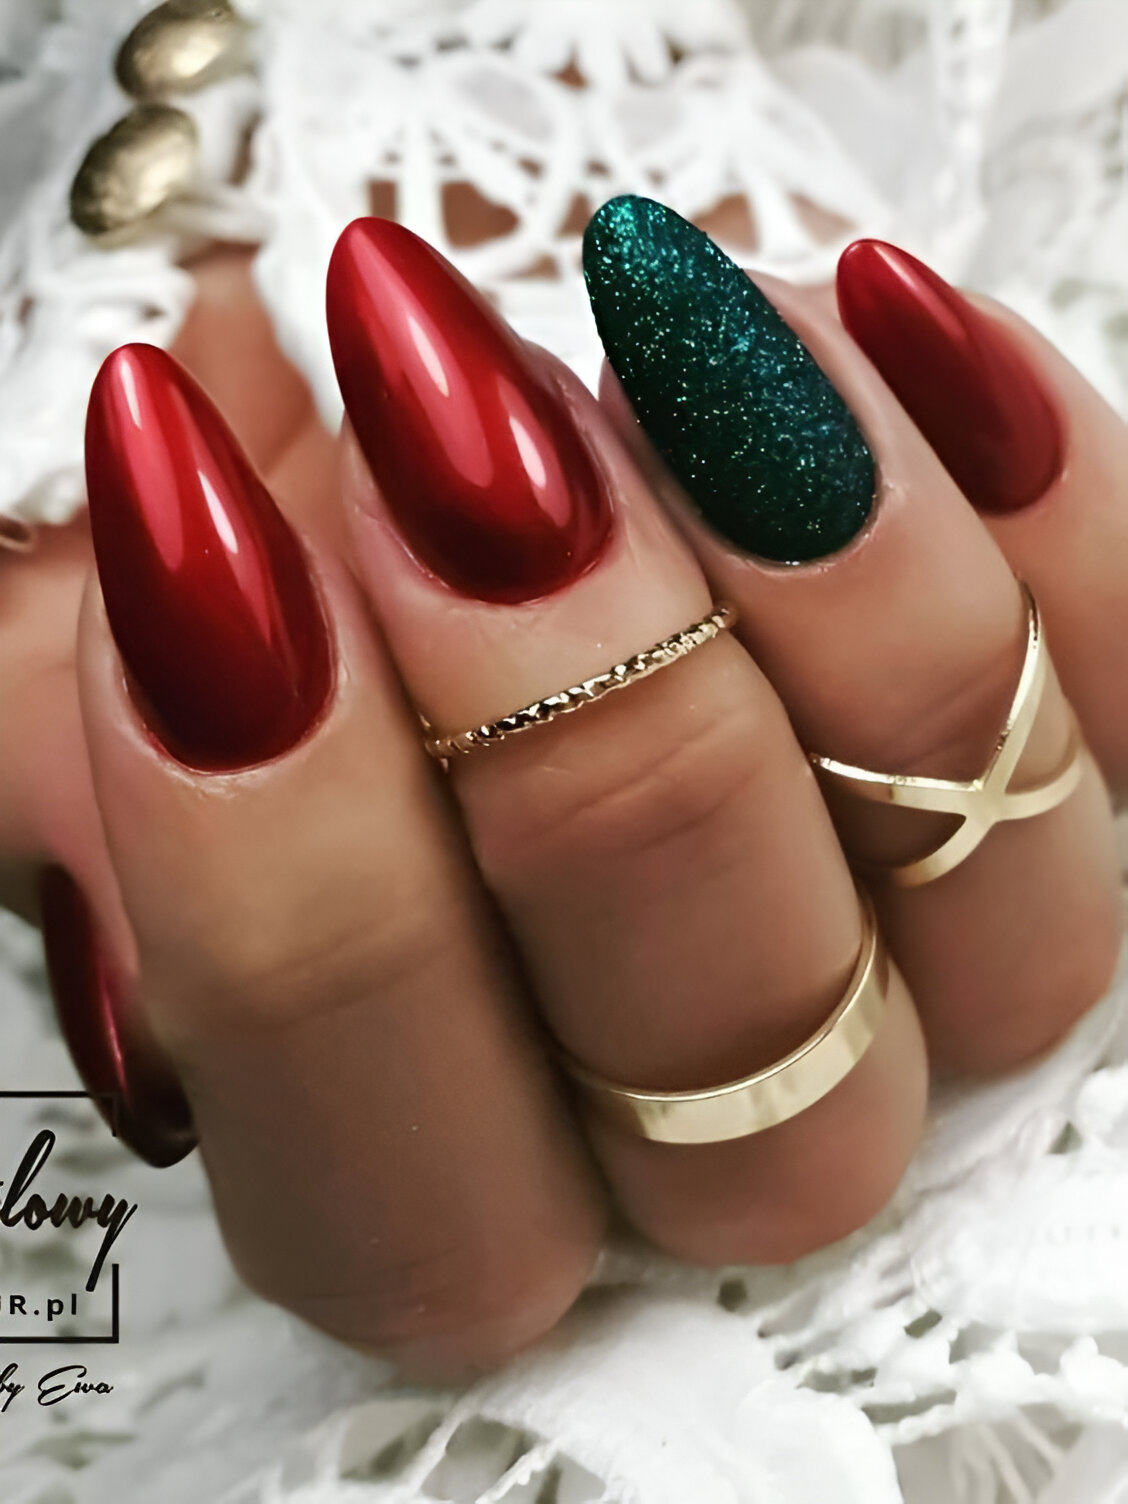 Red And Green Christmas Nail Art Designs